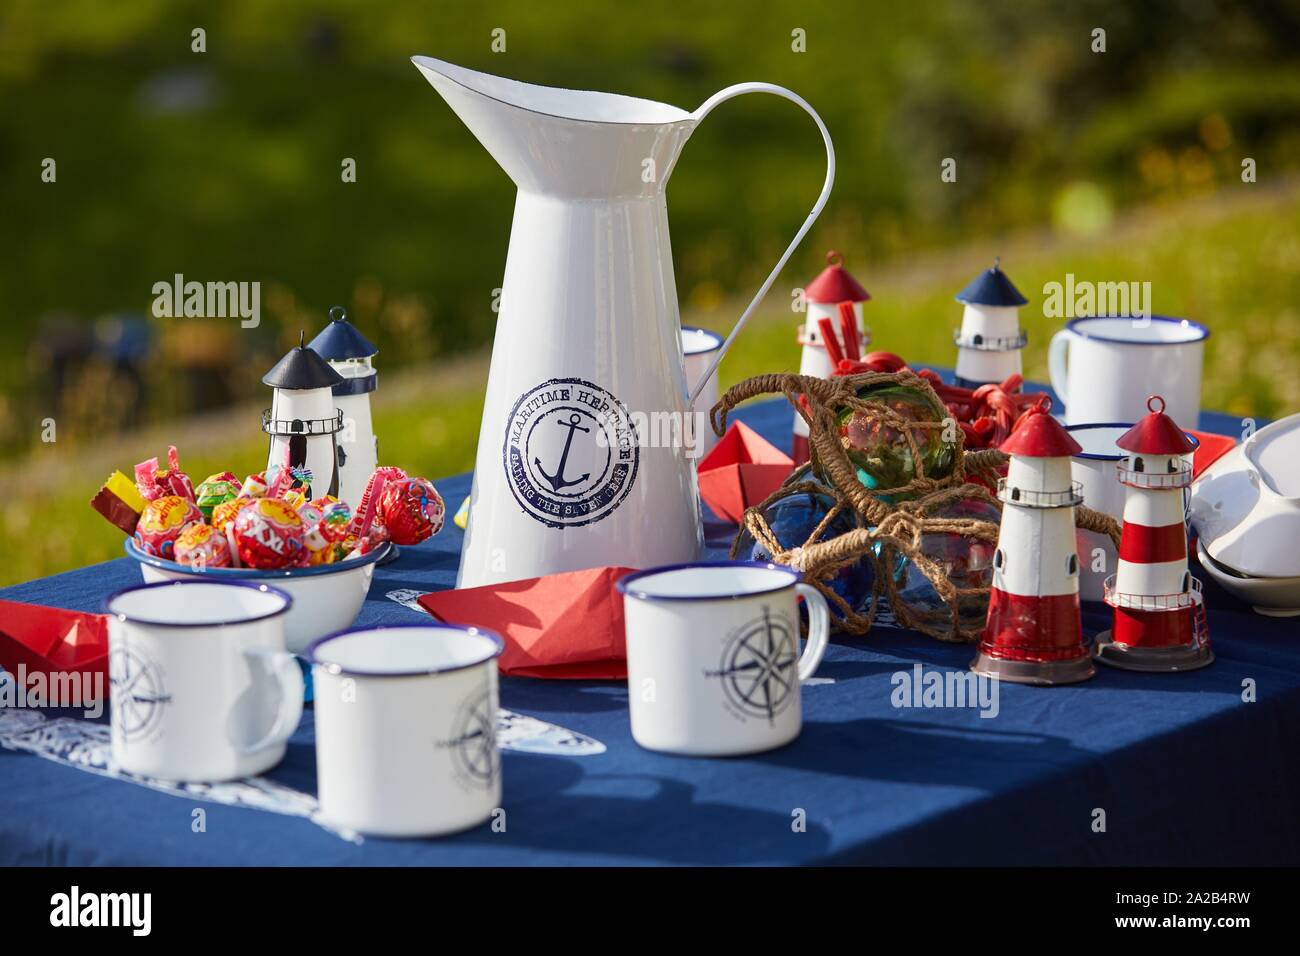 Table with jug and cups, sweets and sailor details Stock Photo